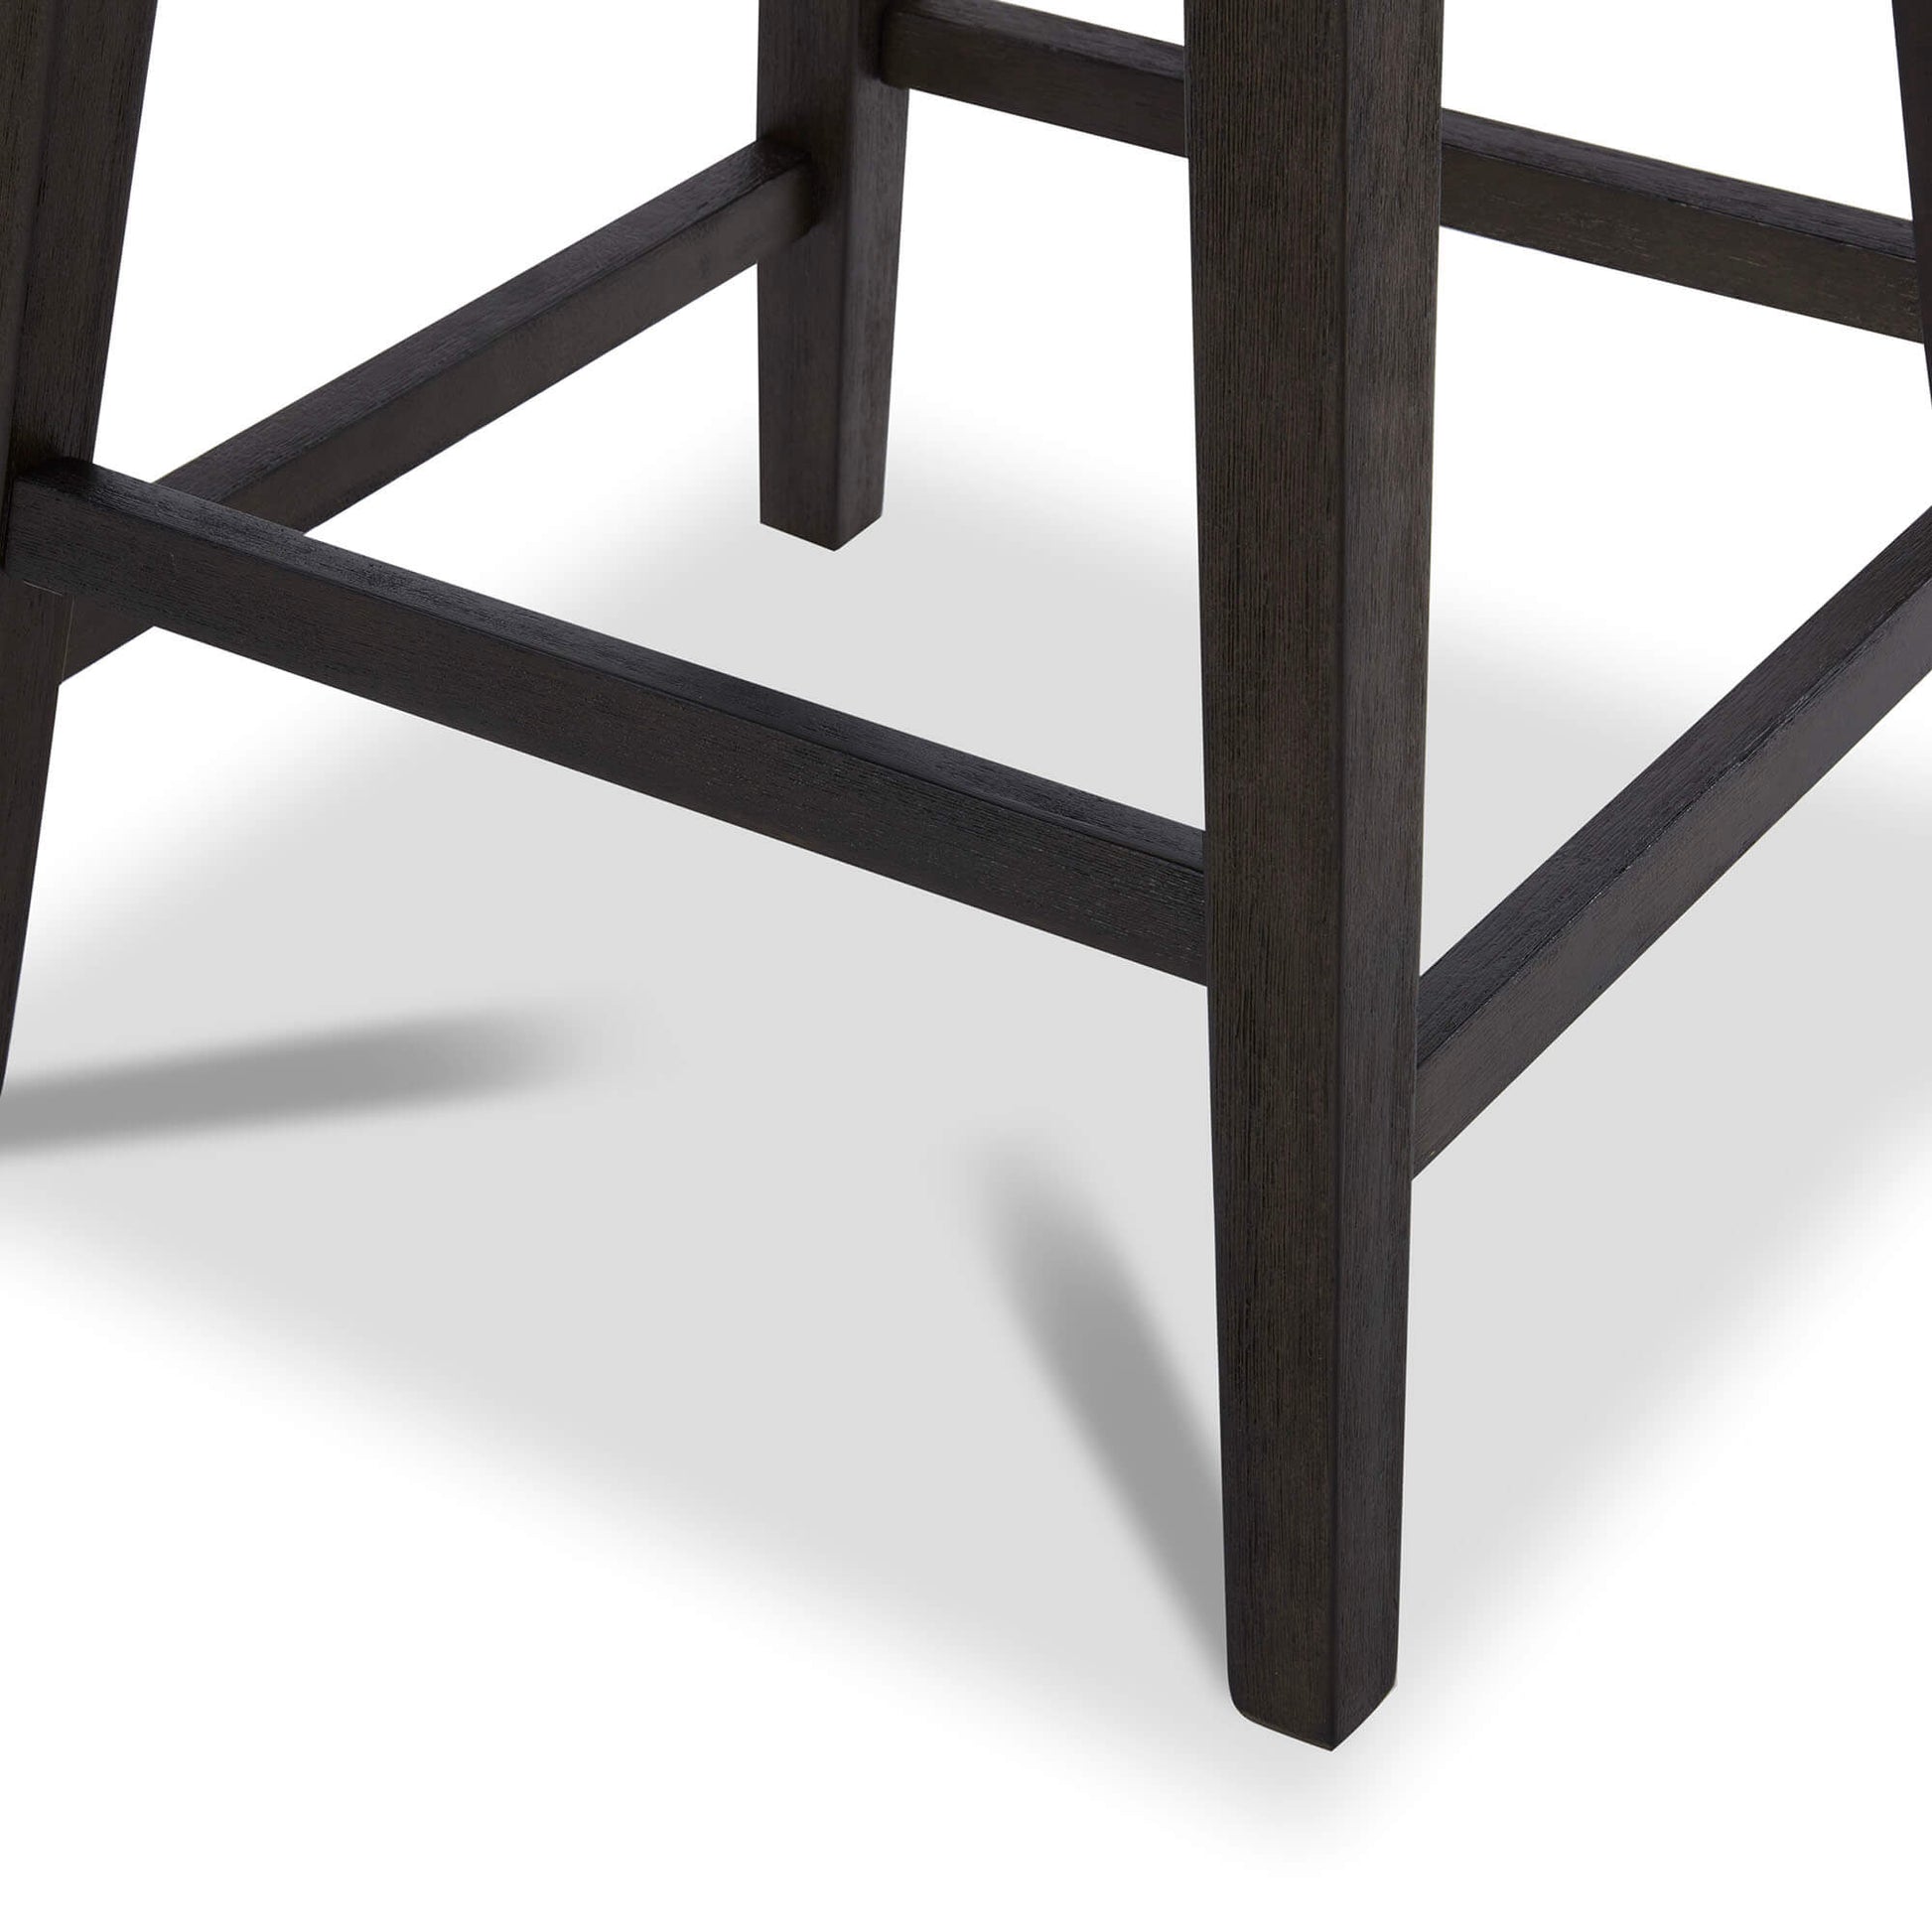 CHITA LIVING-Avery Swivel Counter Stool ( Set of 2)-Counter Stools-Faux Leather-Black-